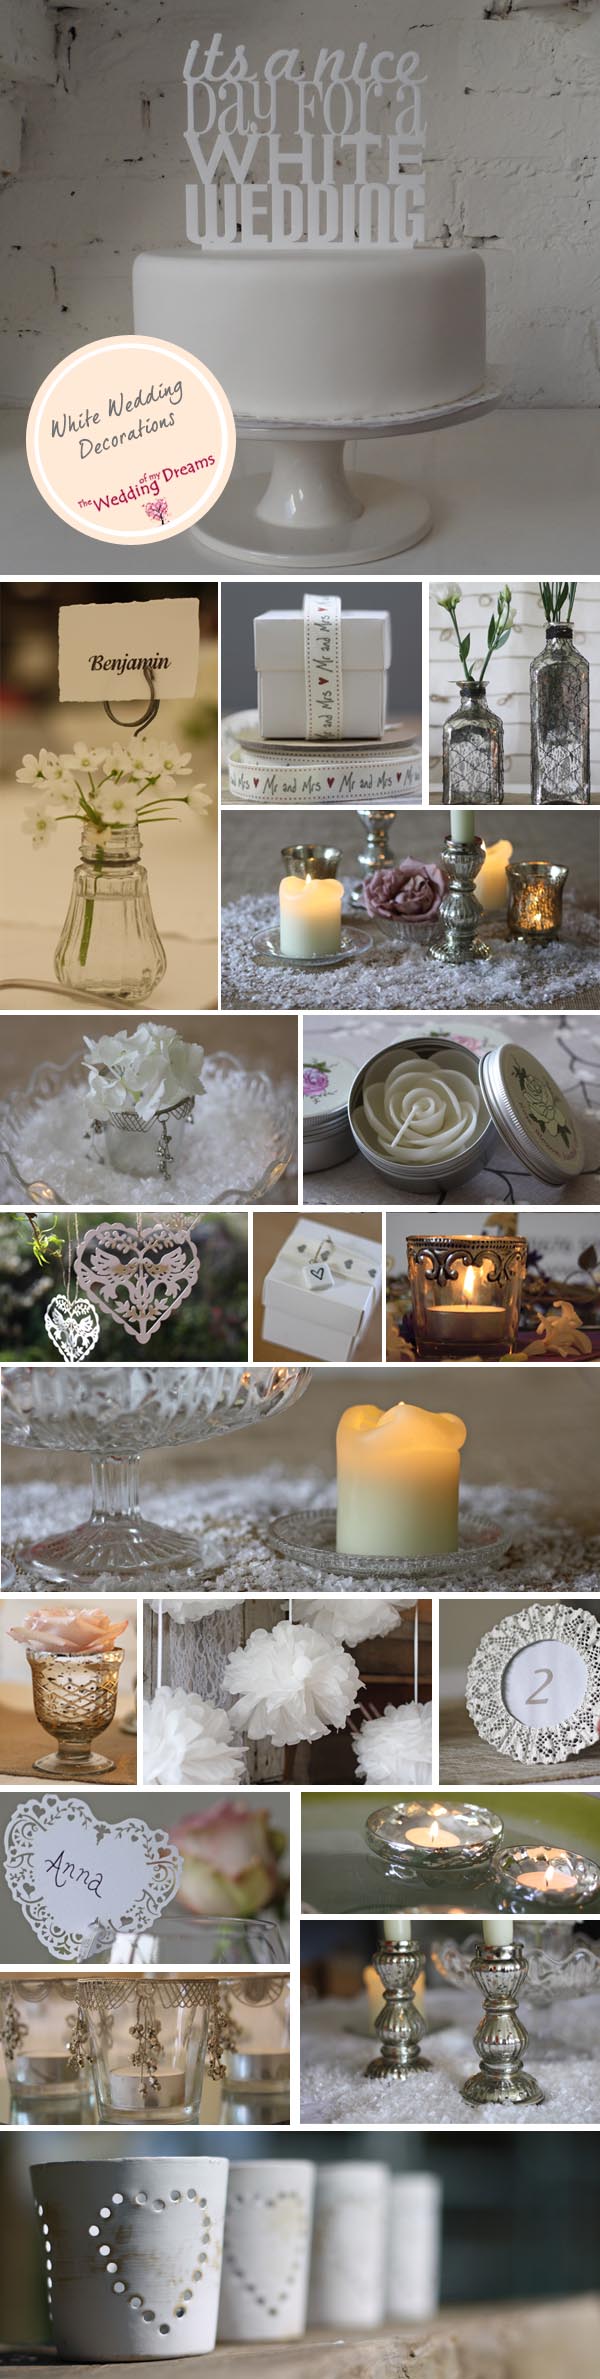 white and silver wedding decorations